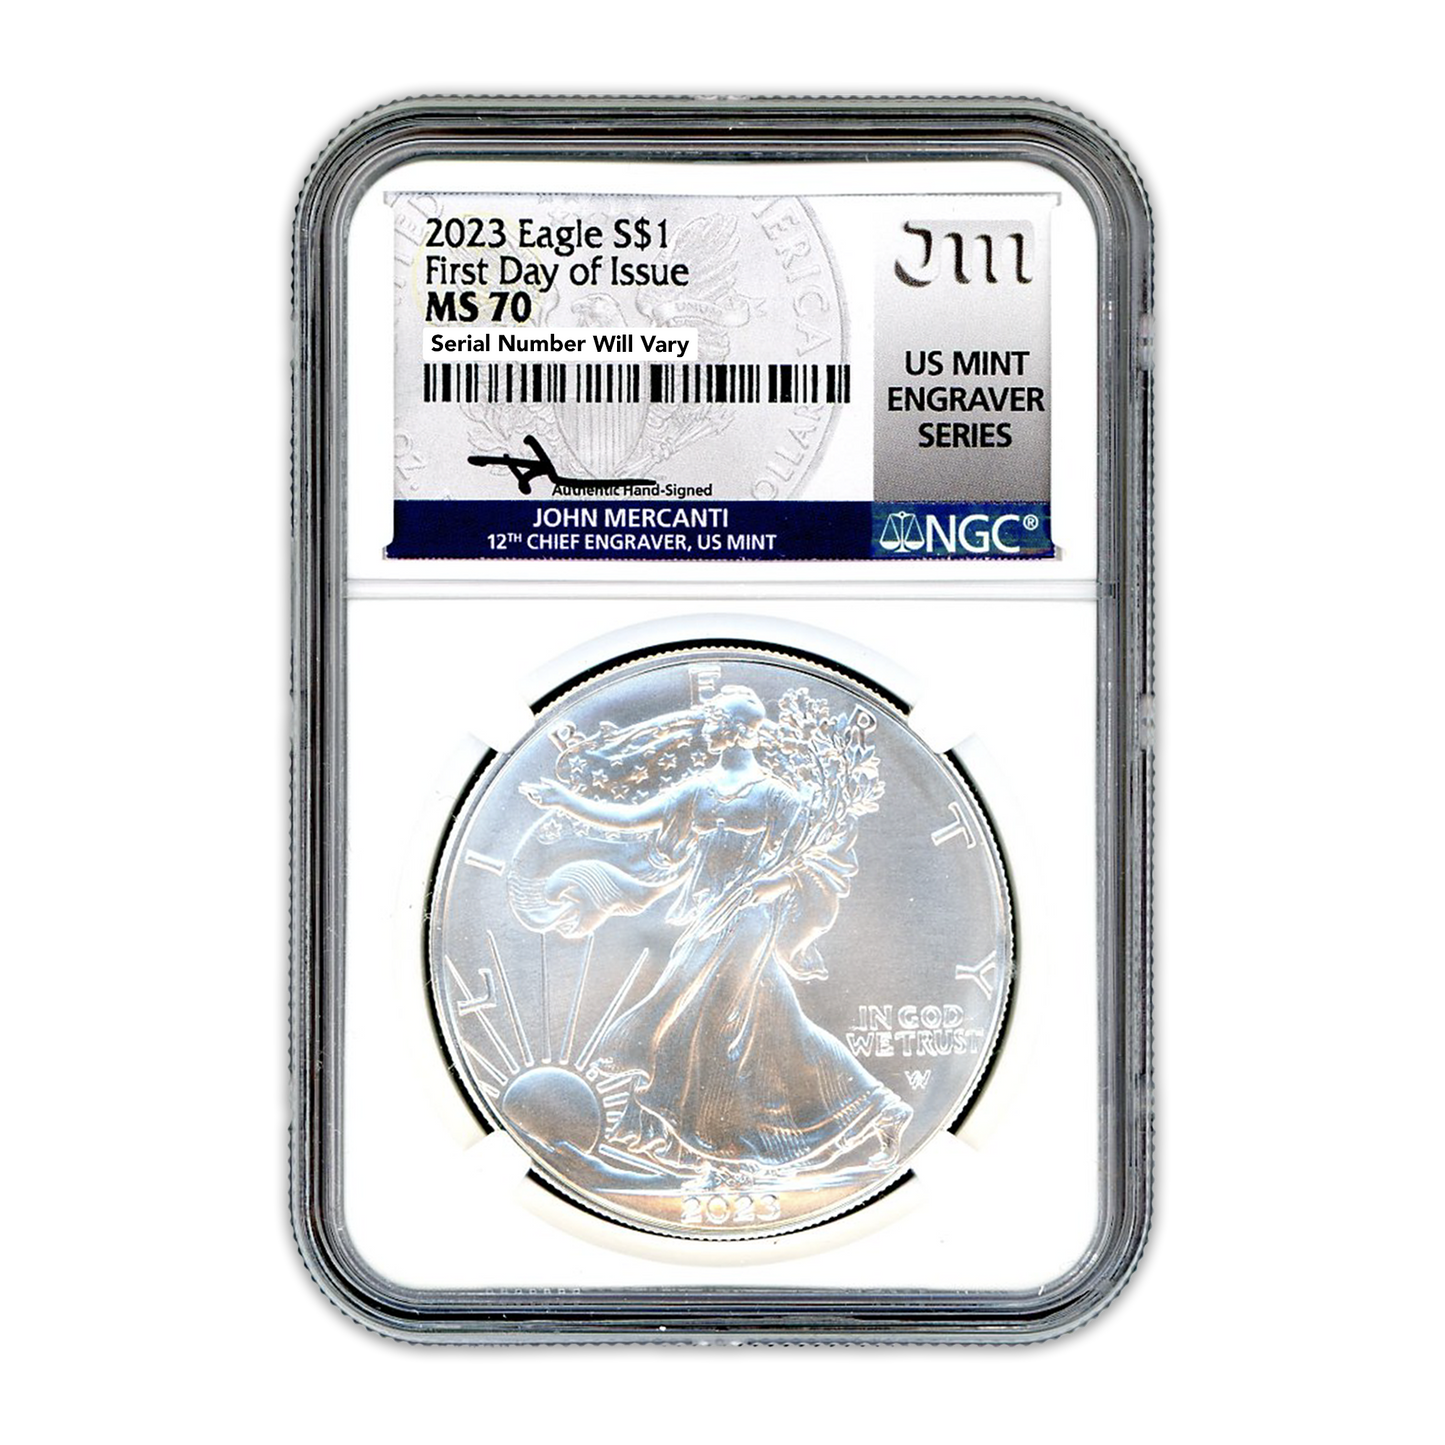 2023 Silver Eagle - Business Strike - First Day of Issue - NGC MS70 John Mercanti Label